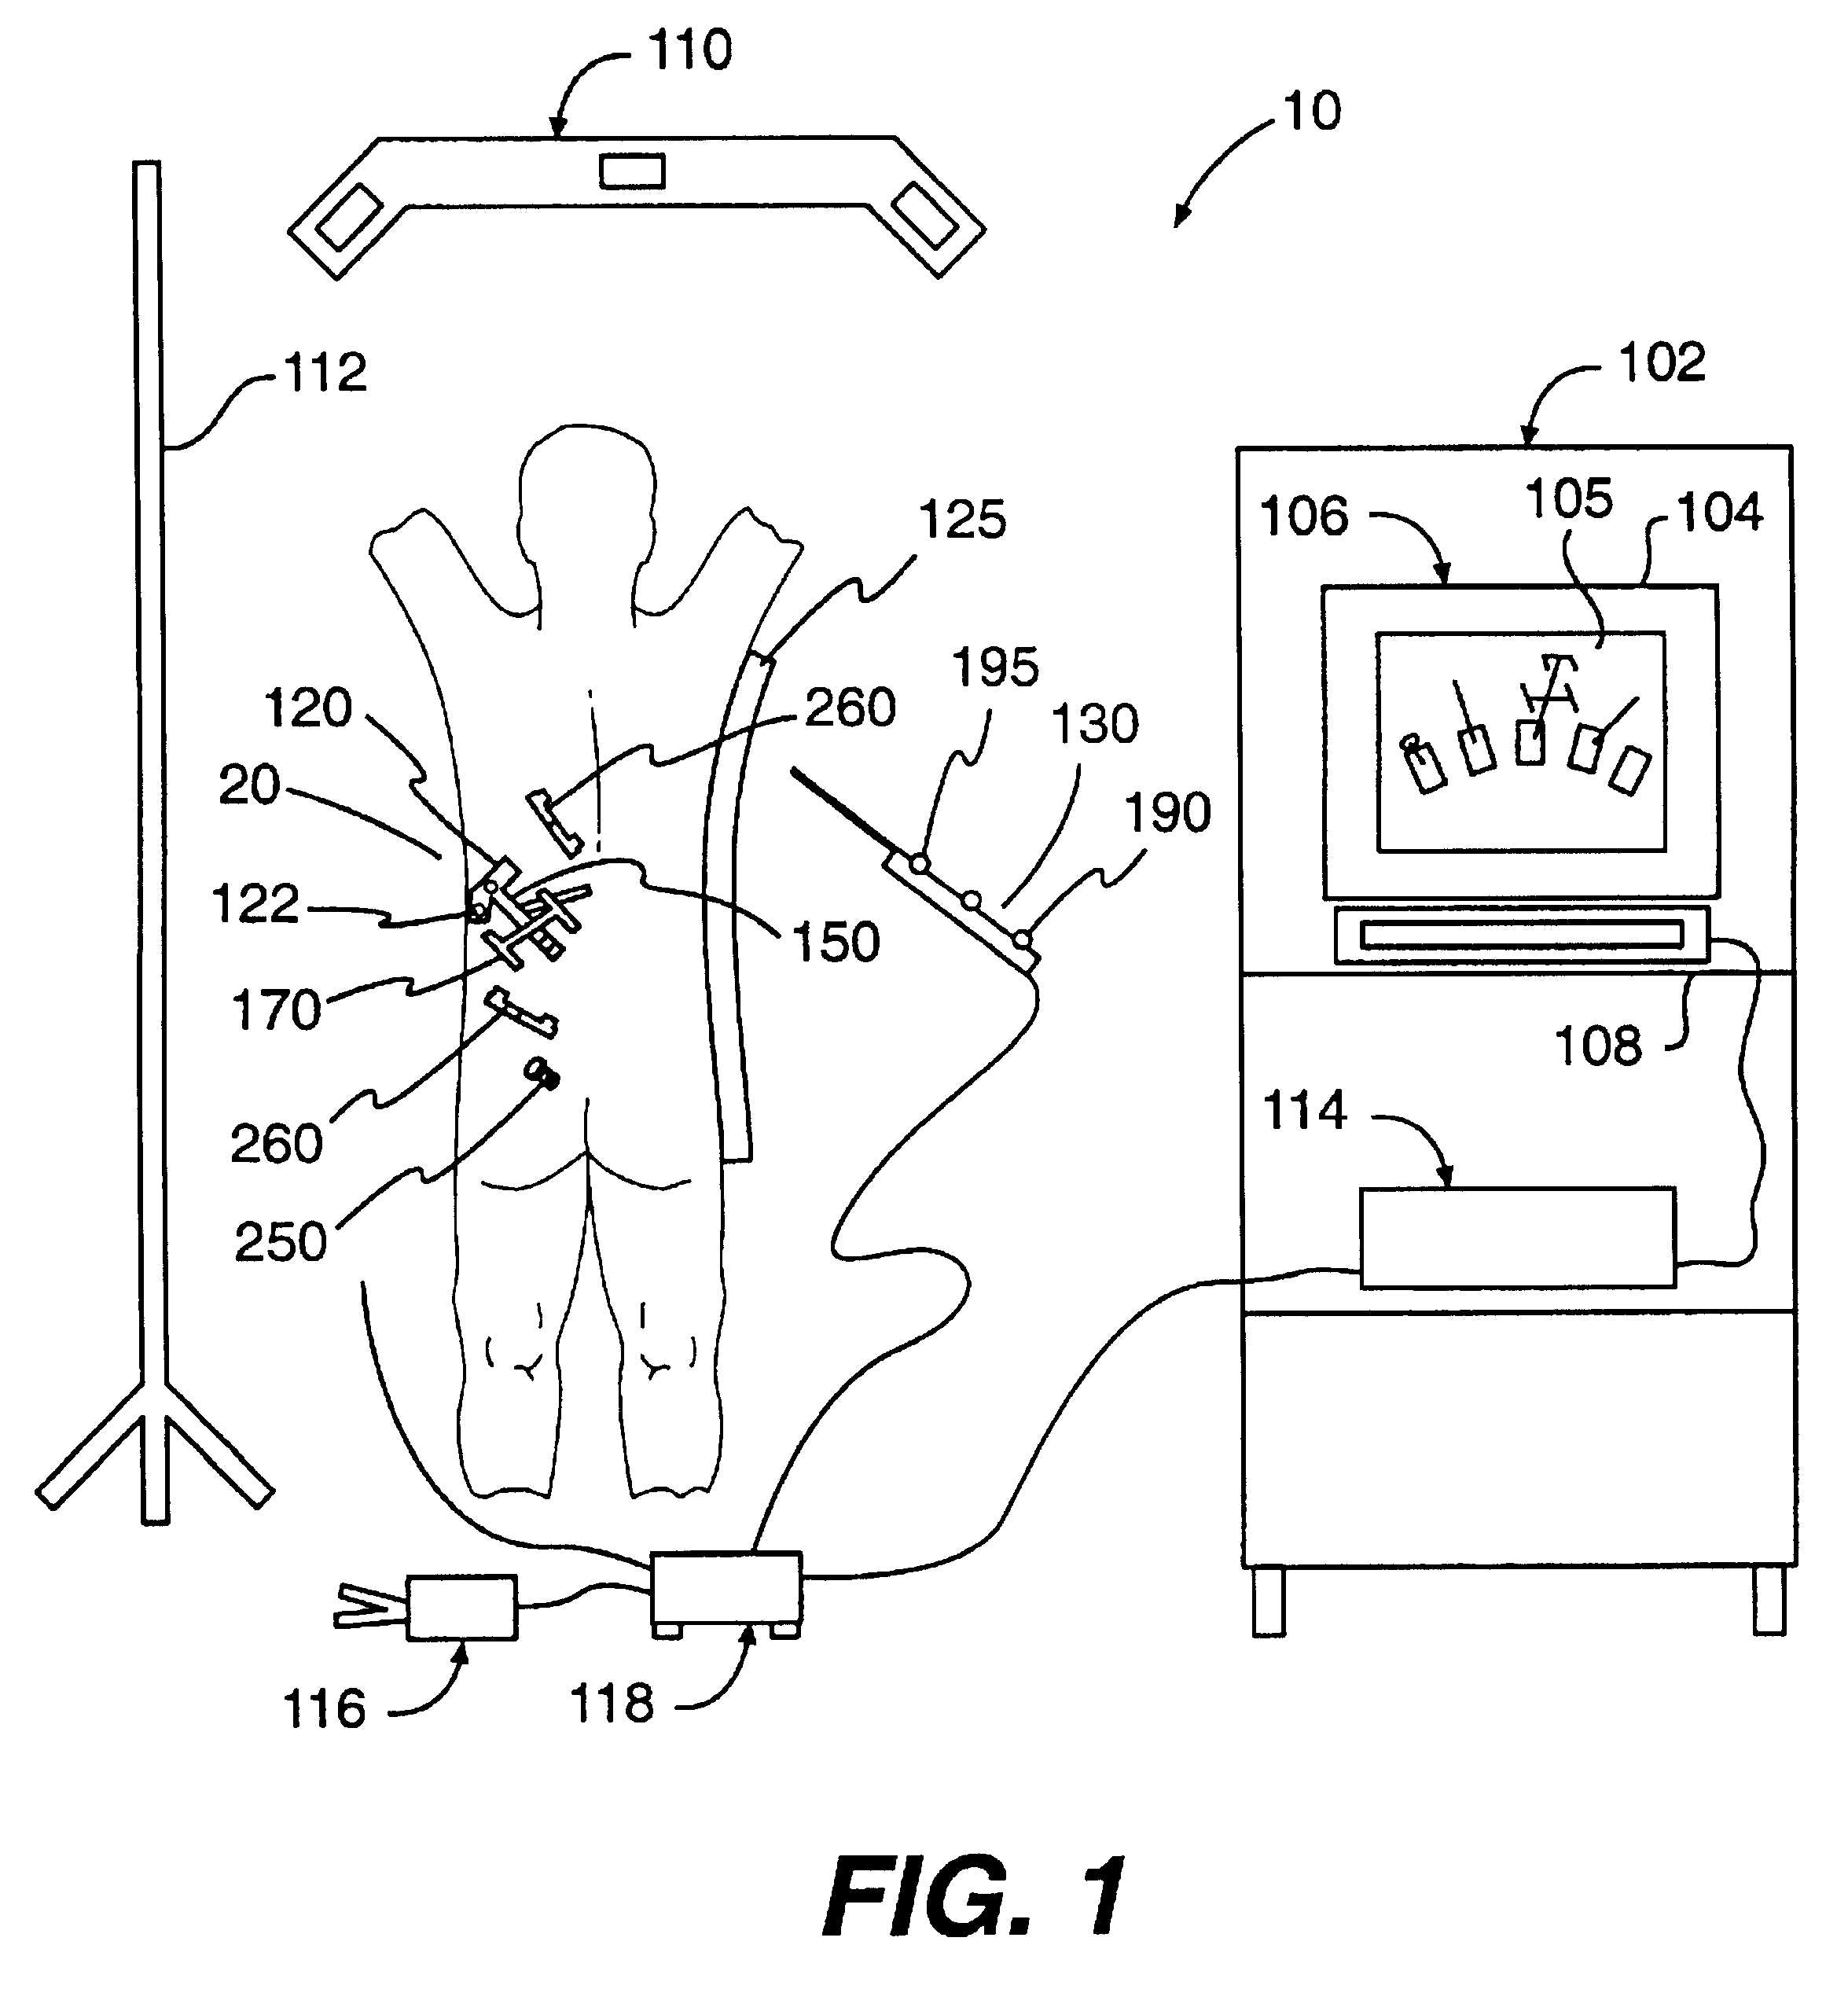 Percutaneous registration apparatus and method for use in computer-assisted surgical navigation